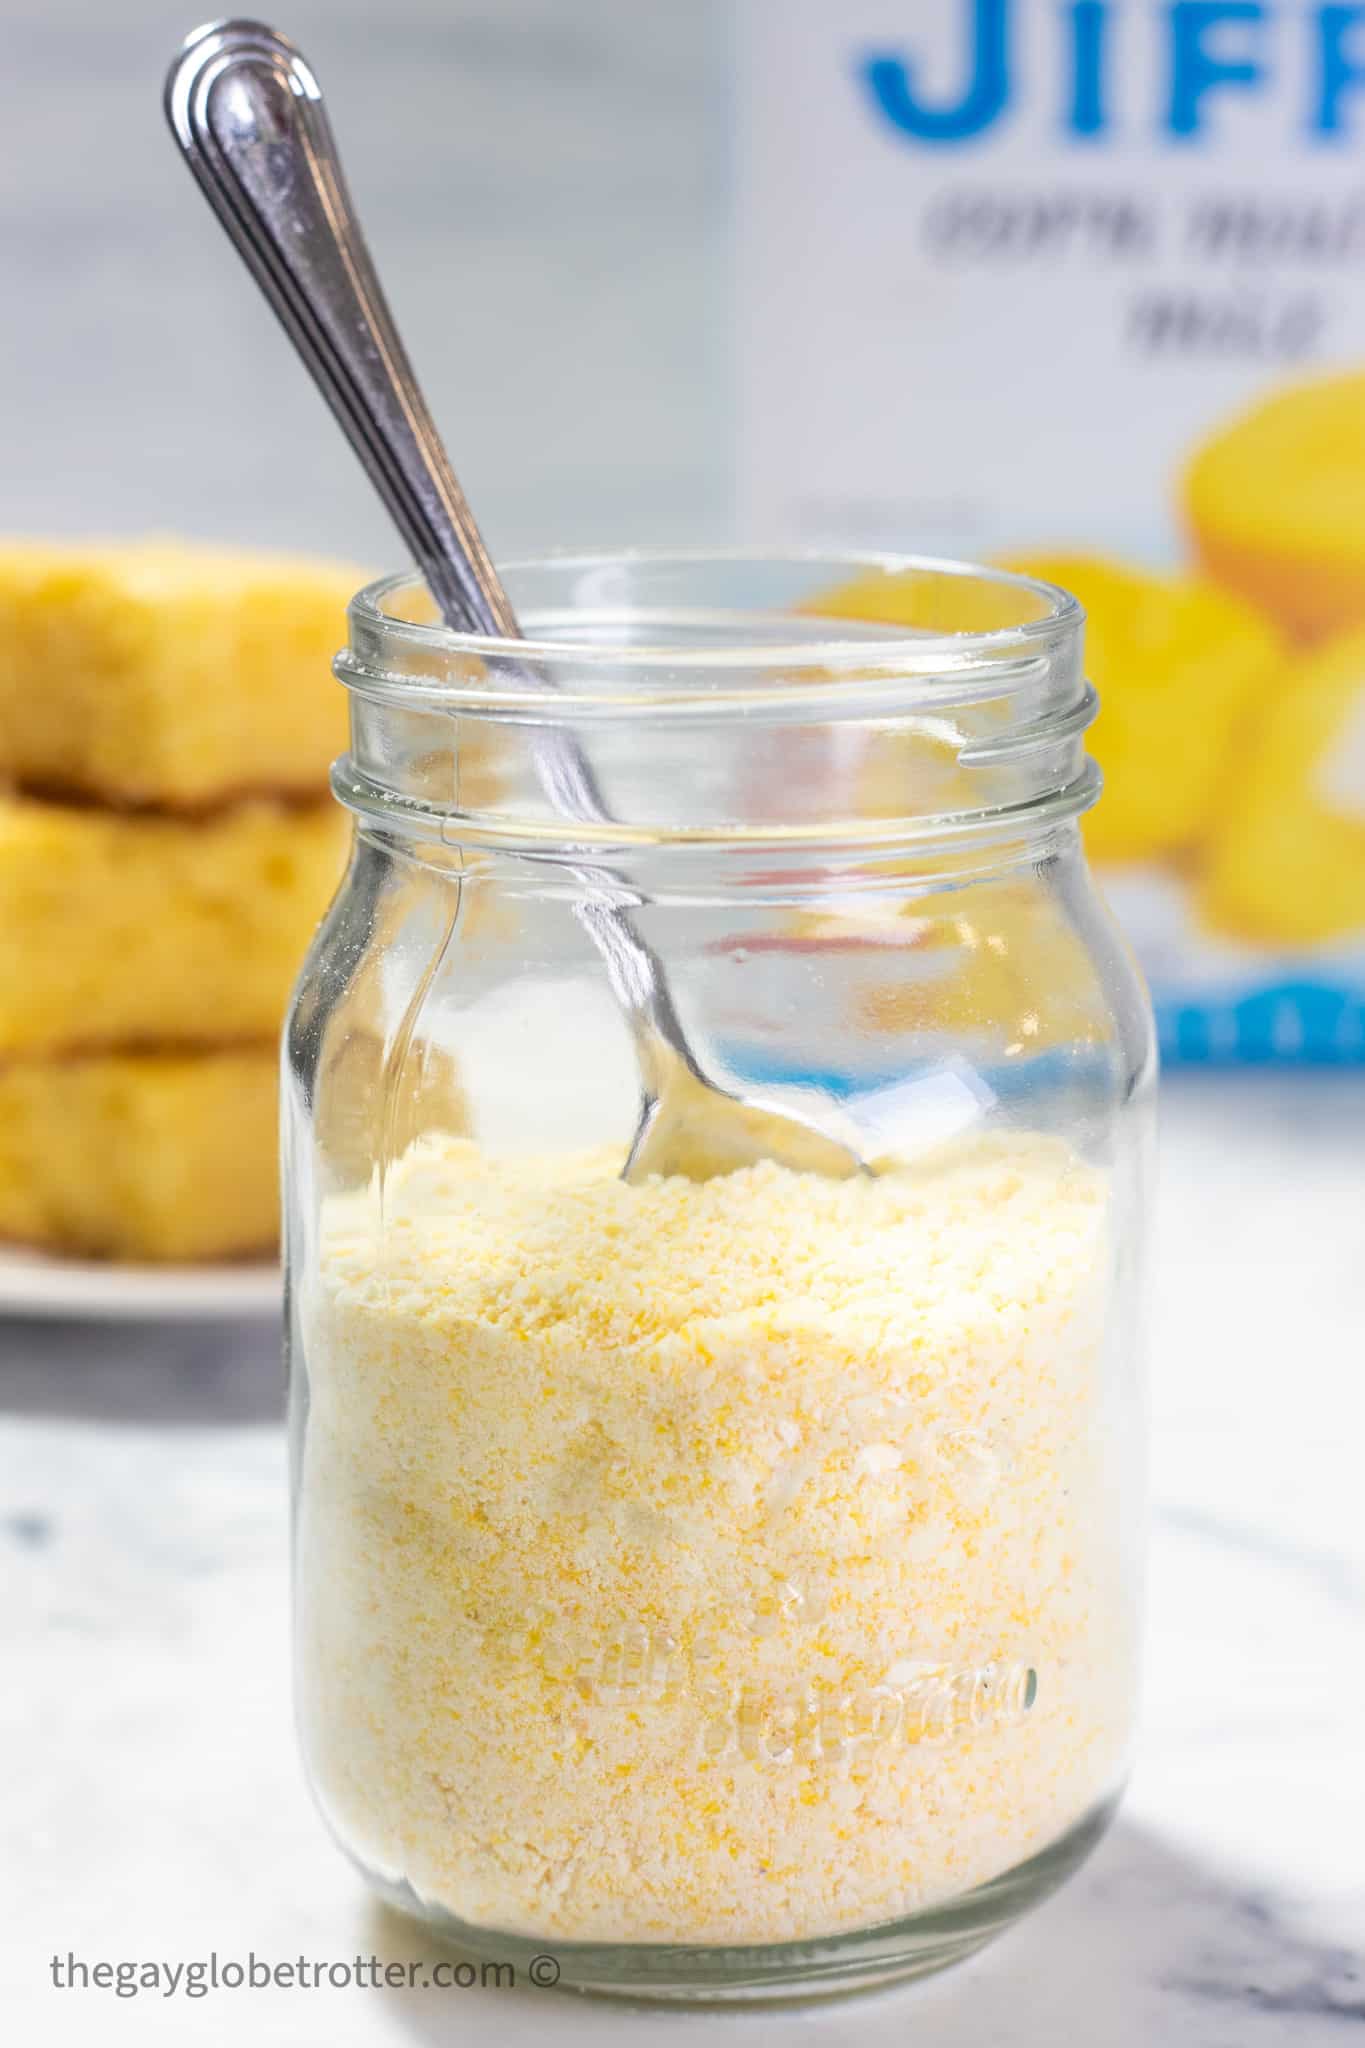 A jar of jiffy corn muffin mix with a spoon and cornbread.